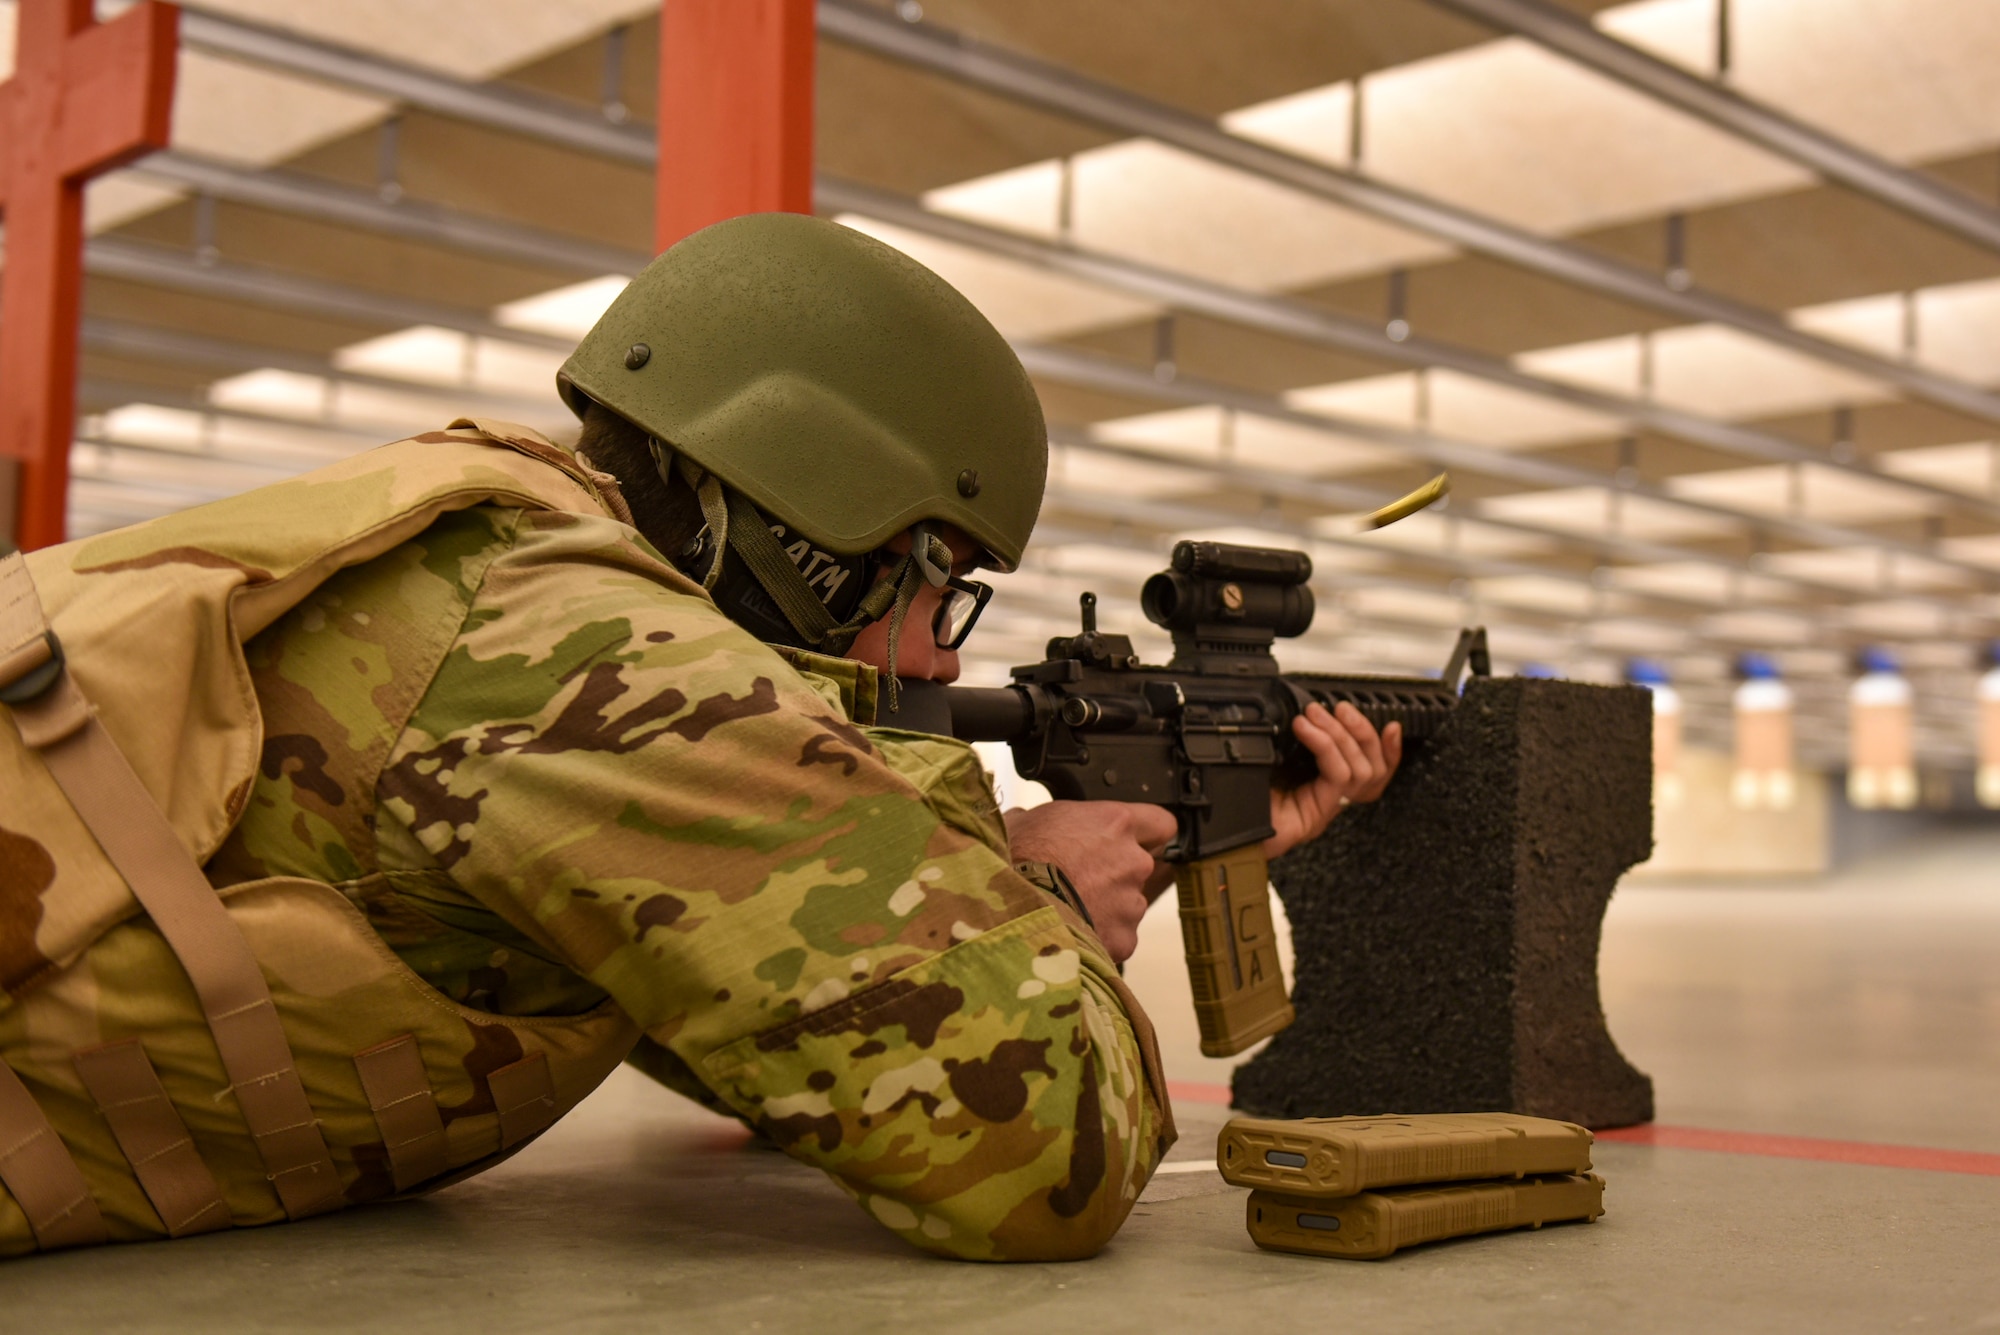 An Airman shoots an M4 Carbine rifle during a Combat Arms Training and Maintenance course.